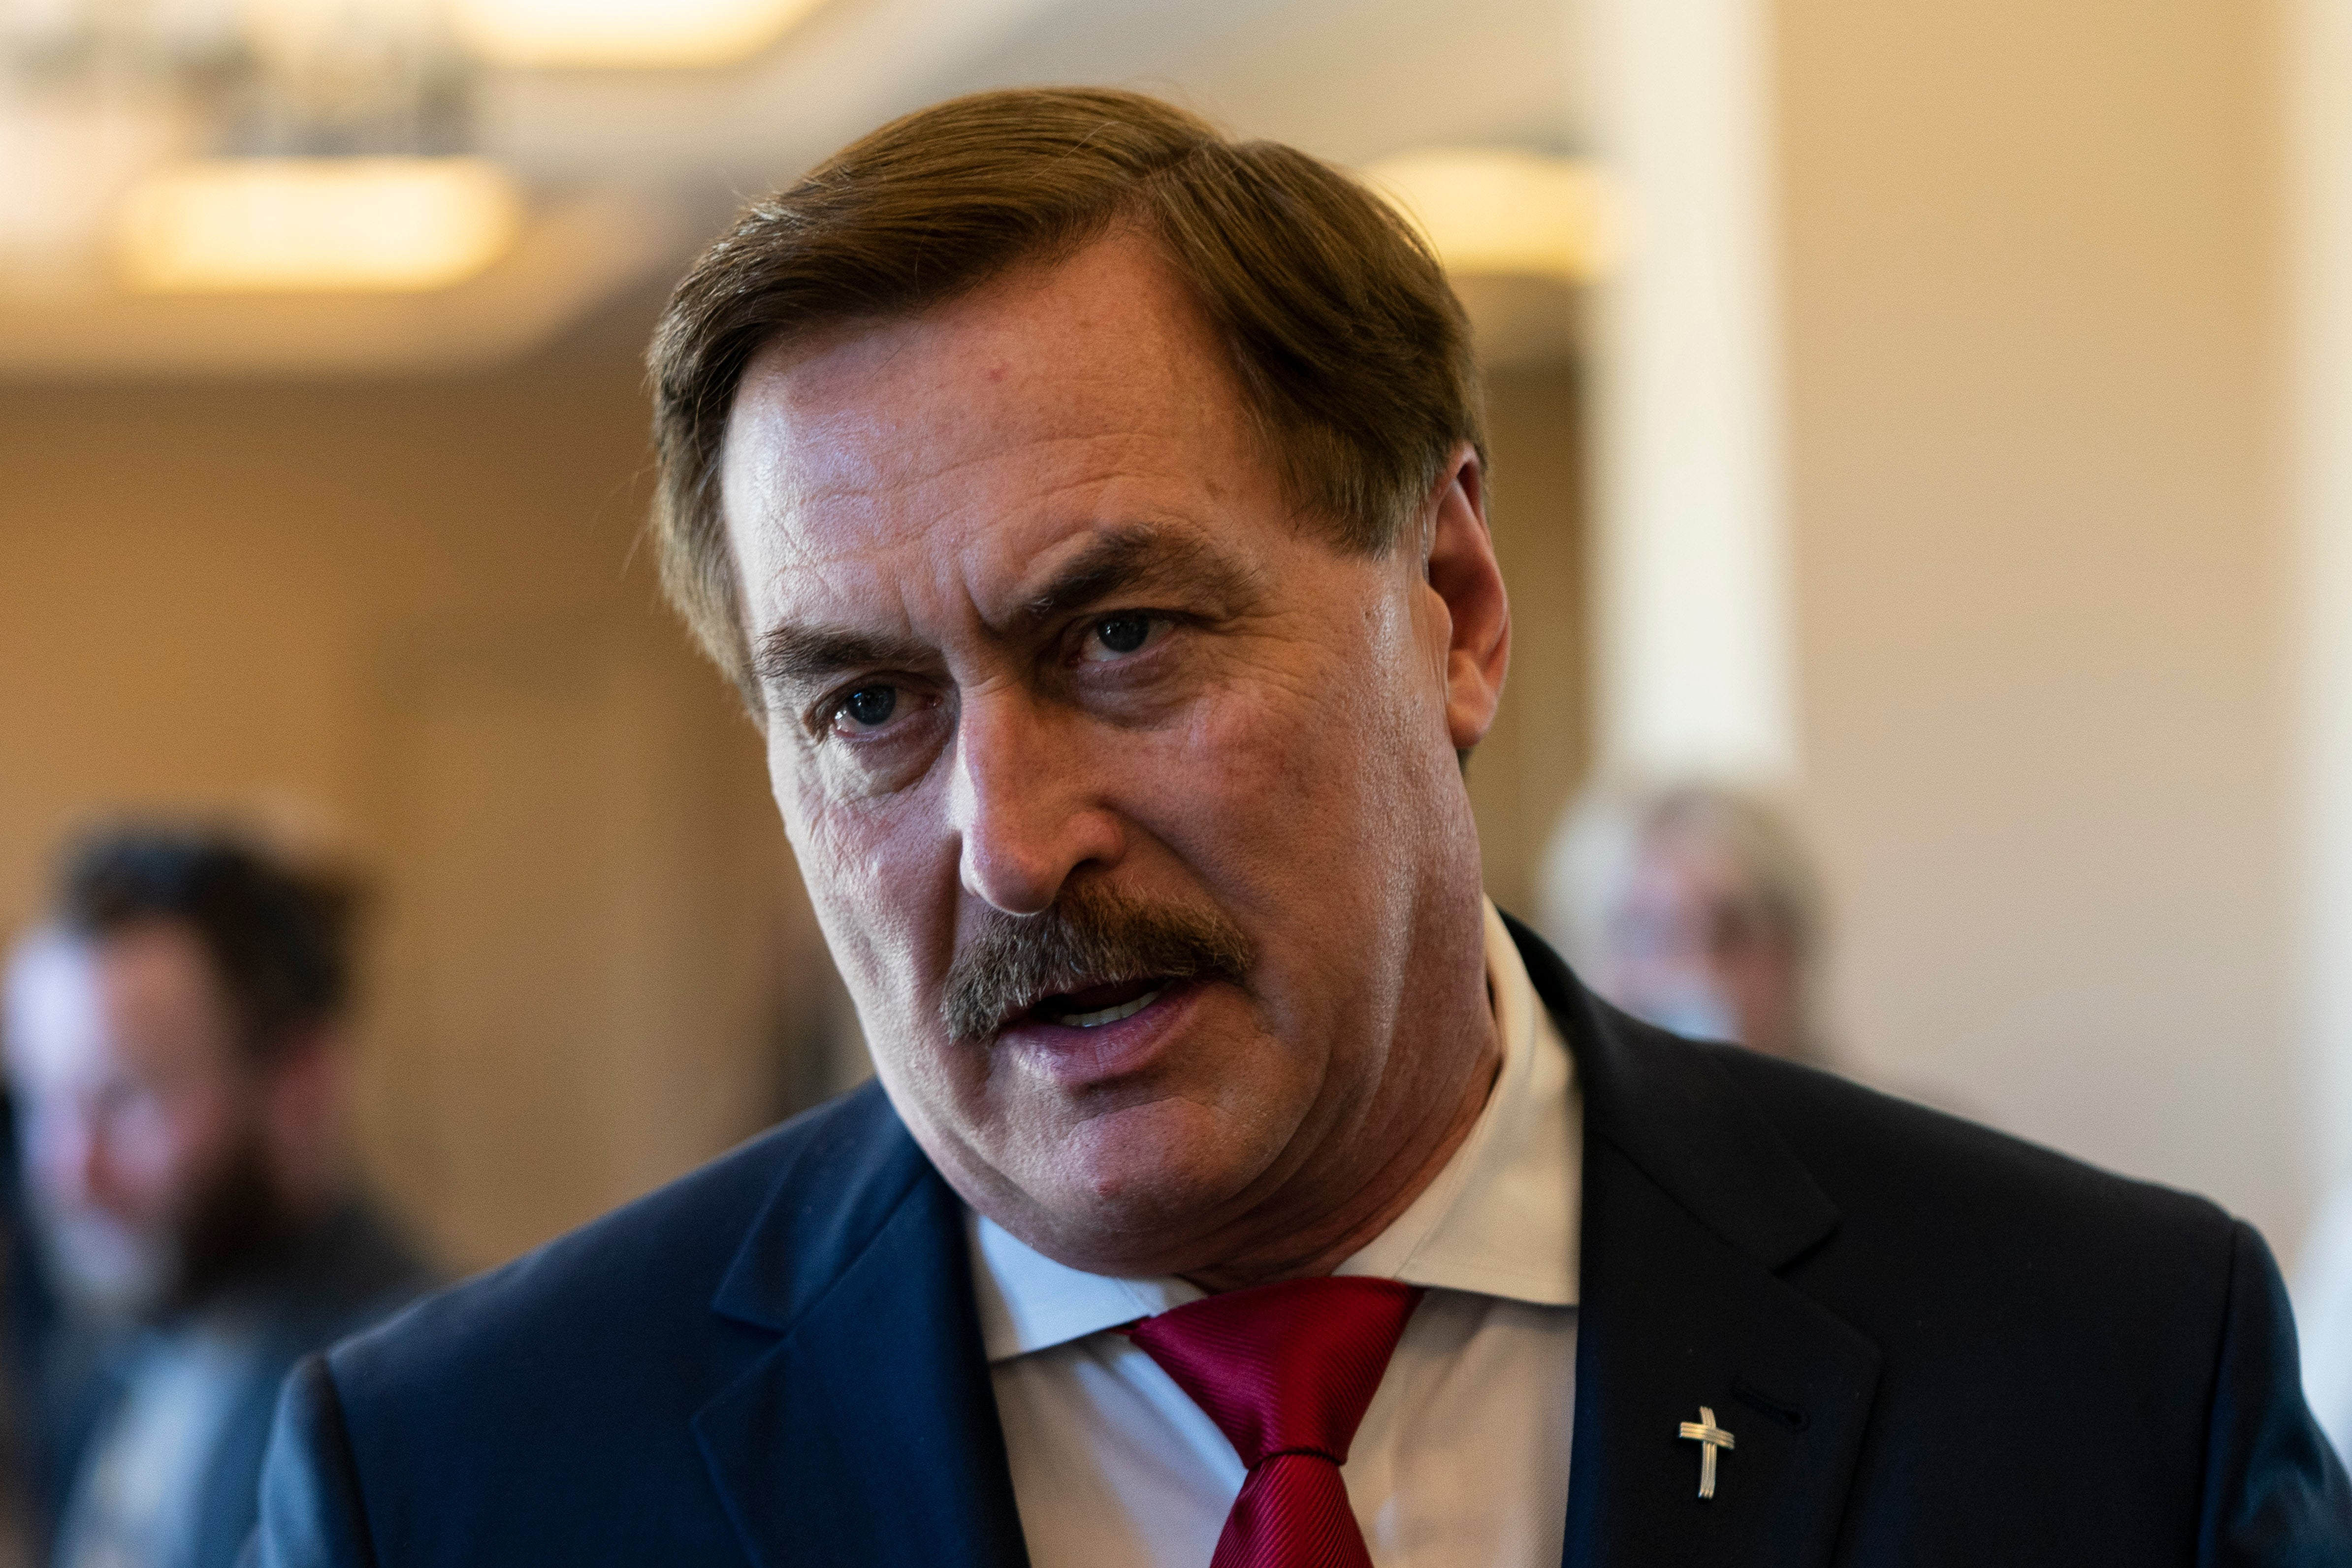 Mike Lindell talks to reporters at the Republican National Committee winter meeting